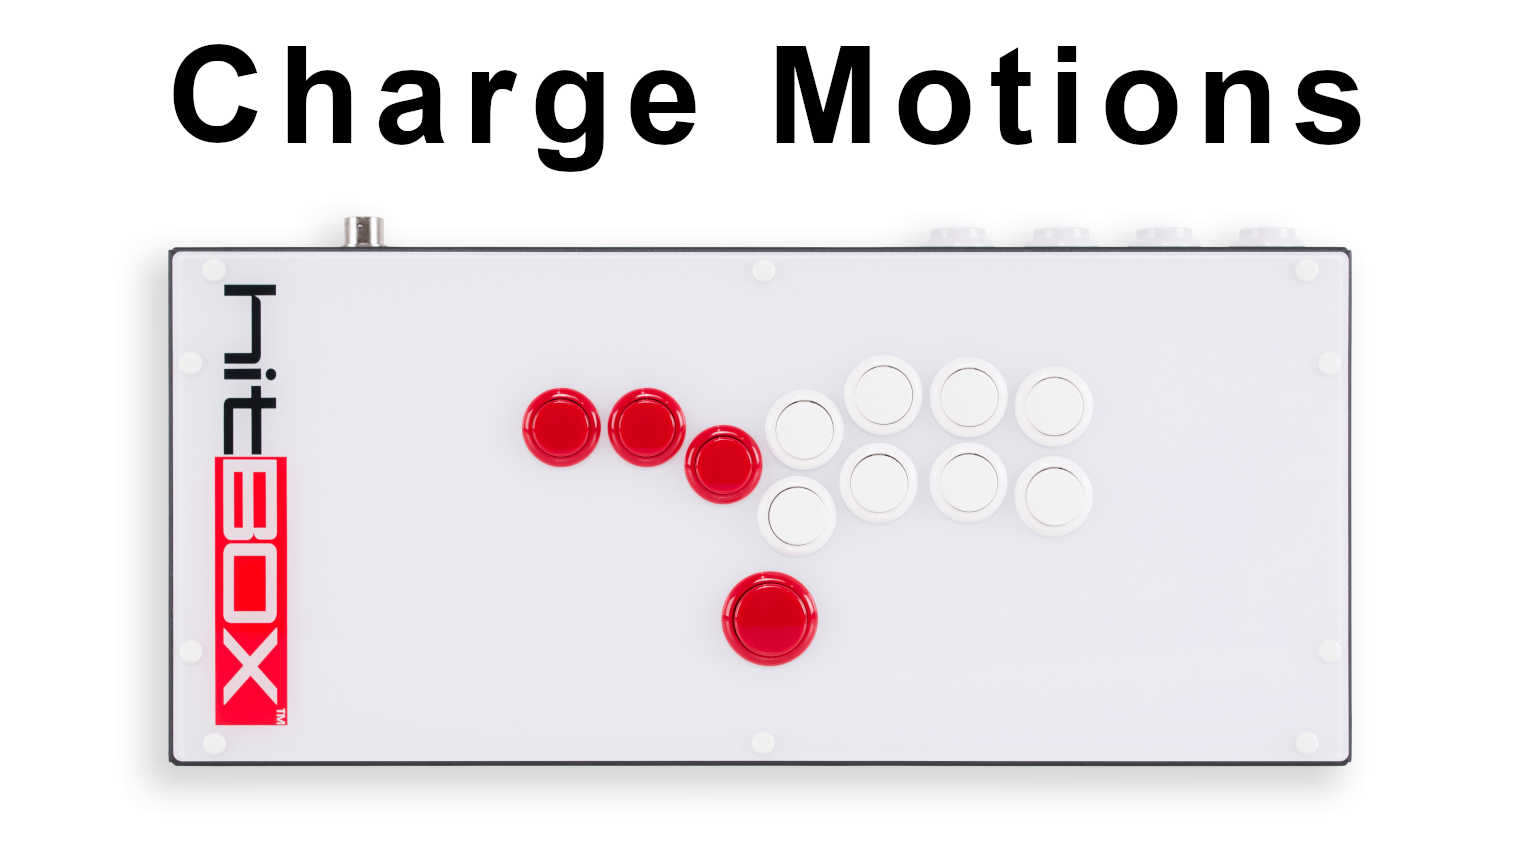 Charge Motions on Hit Box